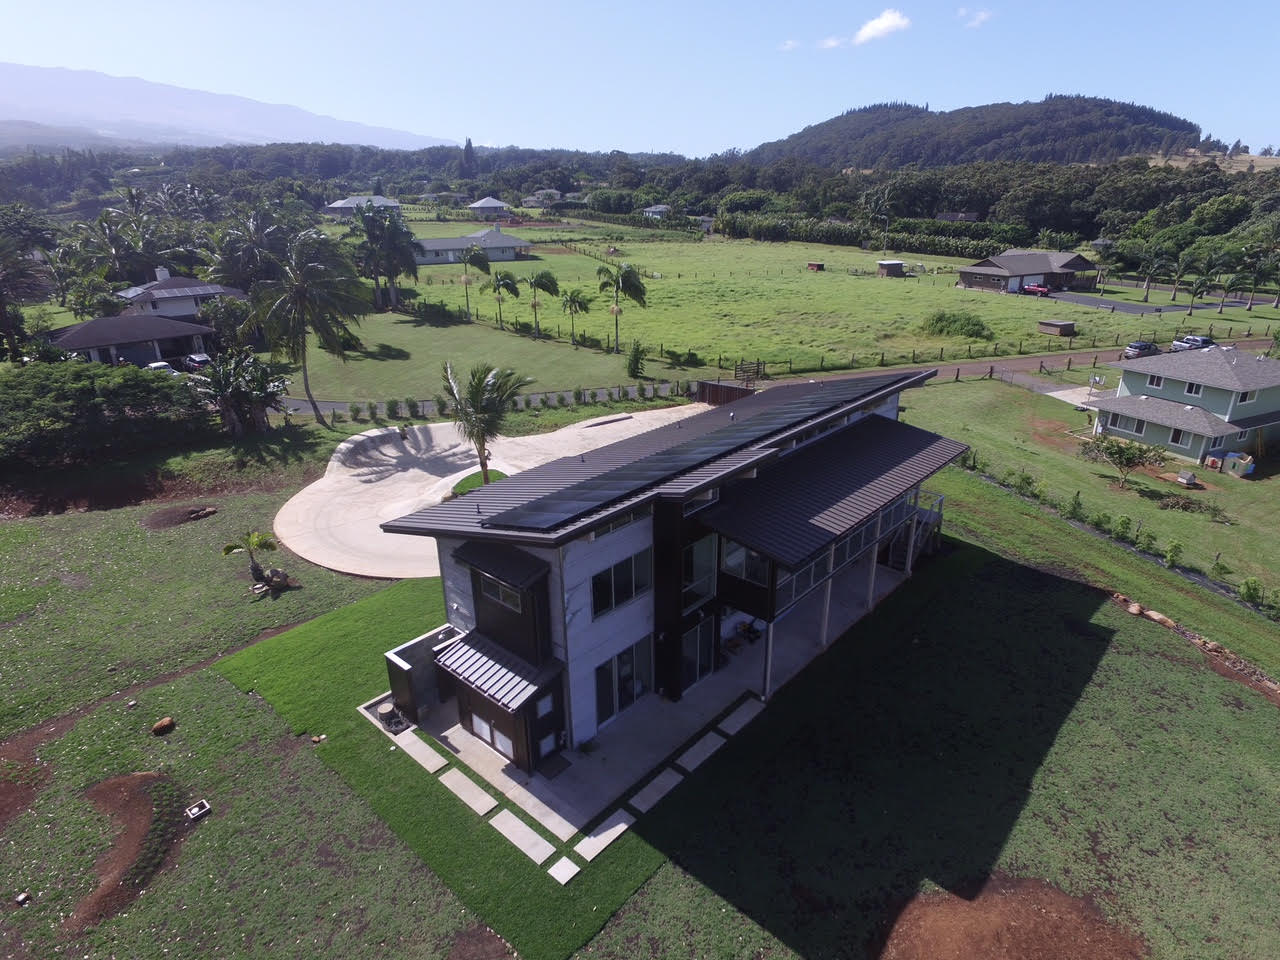 JuiceBox Energy Storage Systems are now available in Hawaii